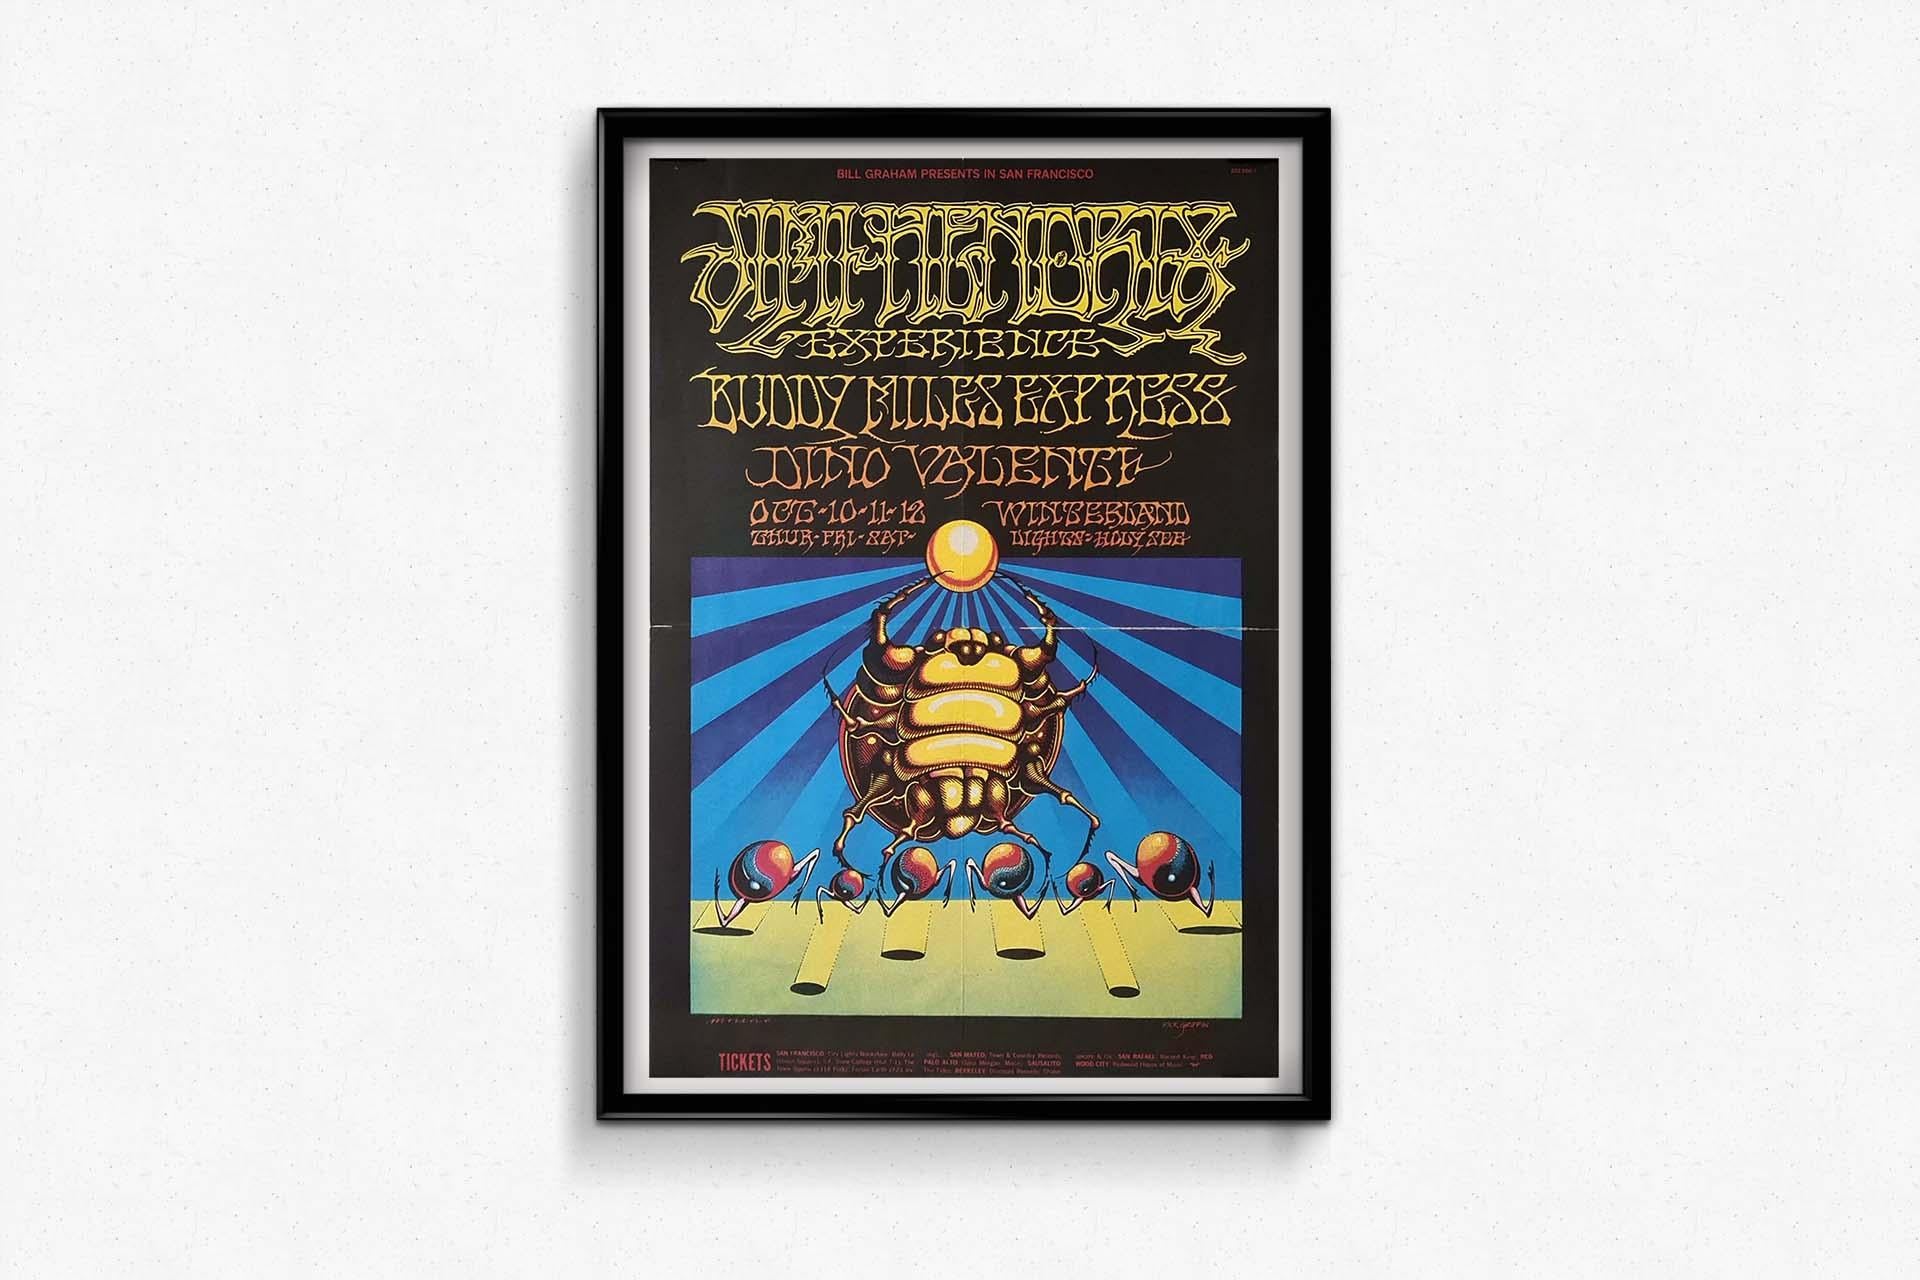 Poster for the concert of Jimi Hendrix, Buddy Miles Express and Dino Valenti For Sale 1